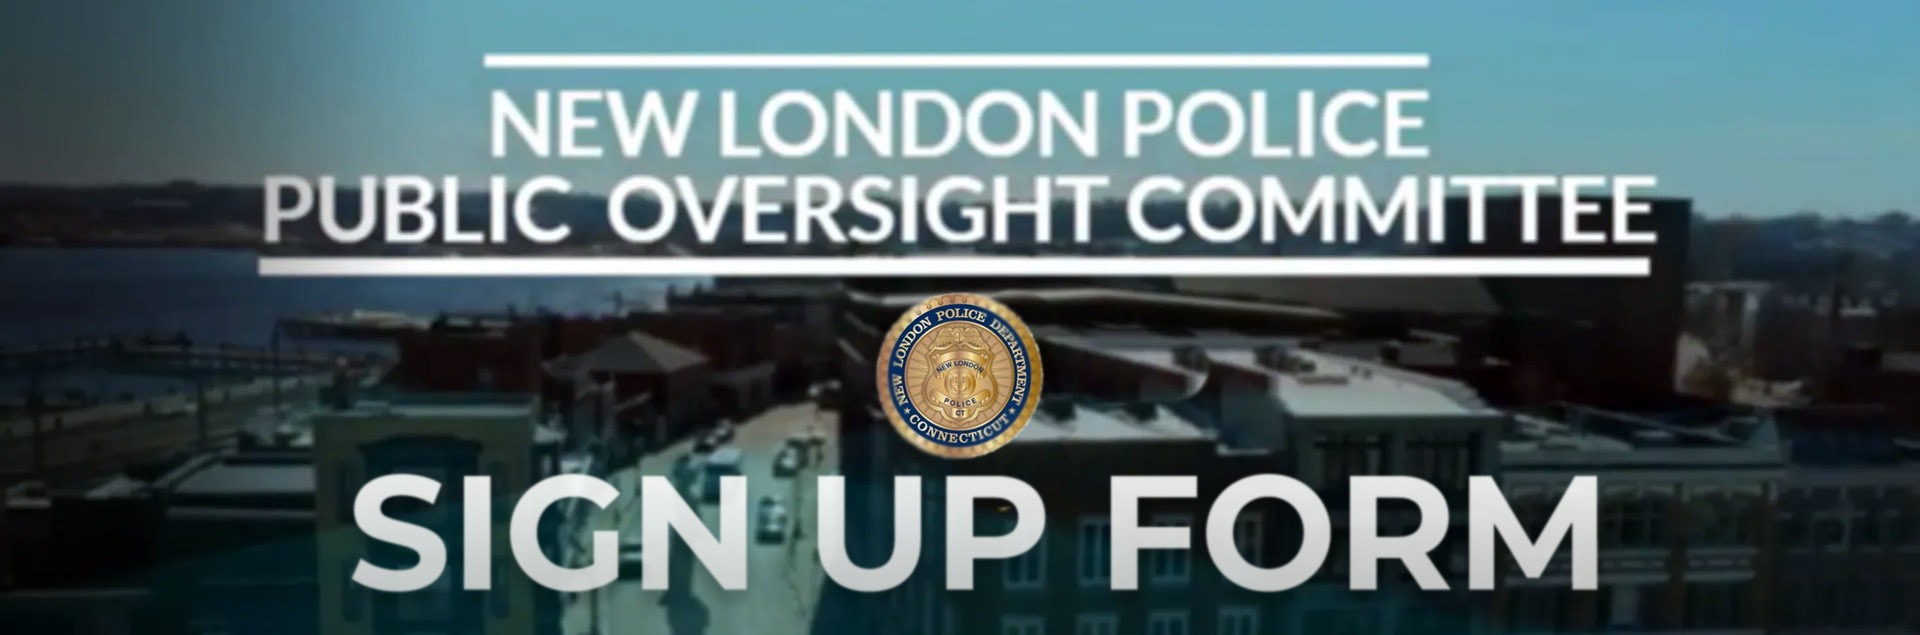 NLPD Oversight Committee sign up form